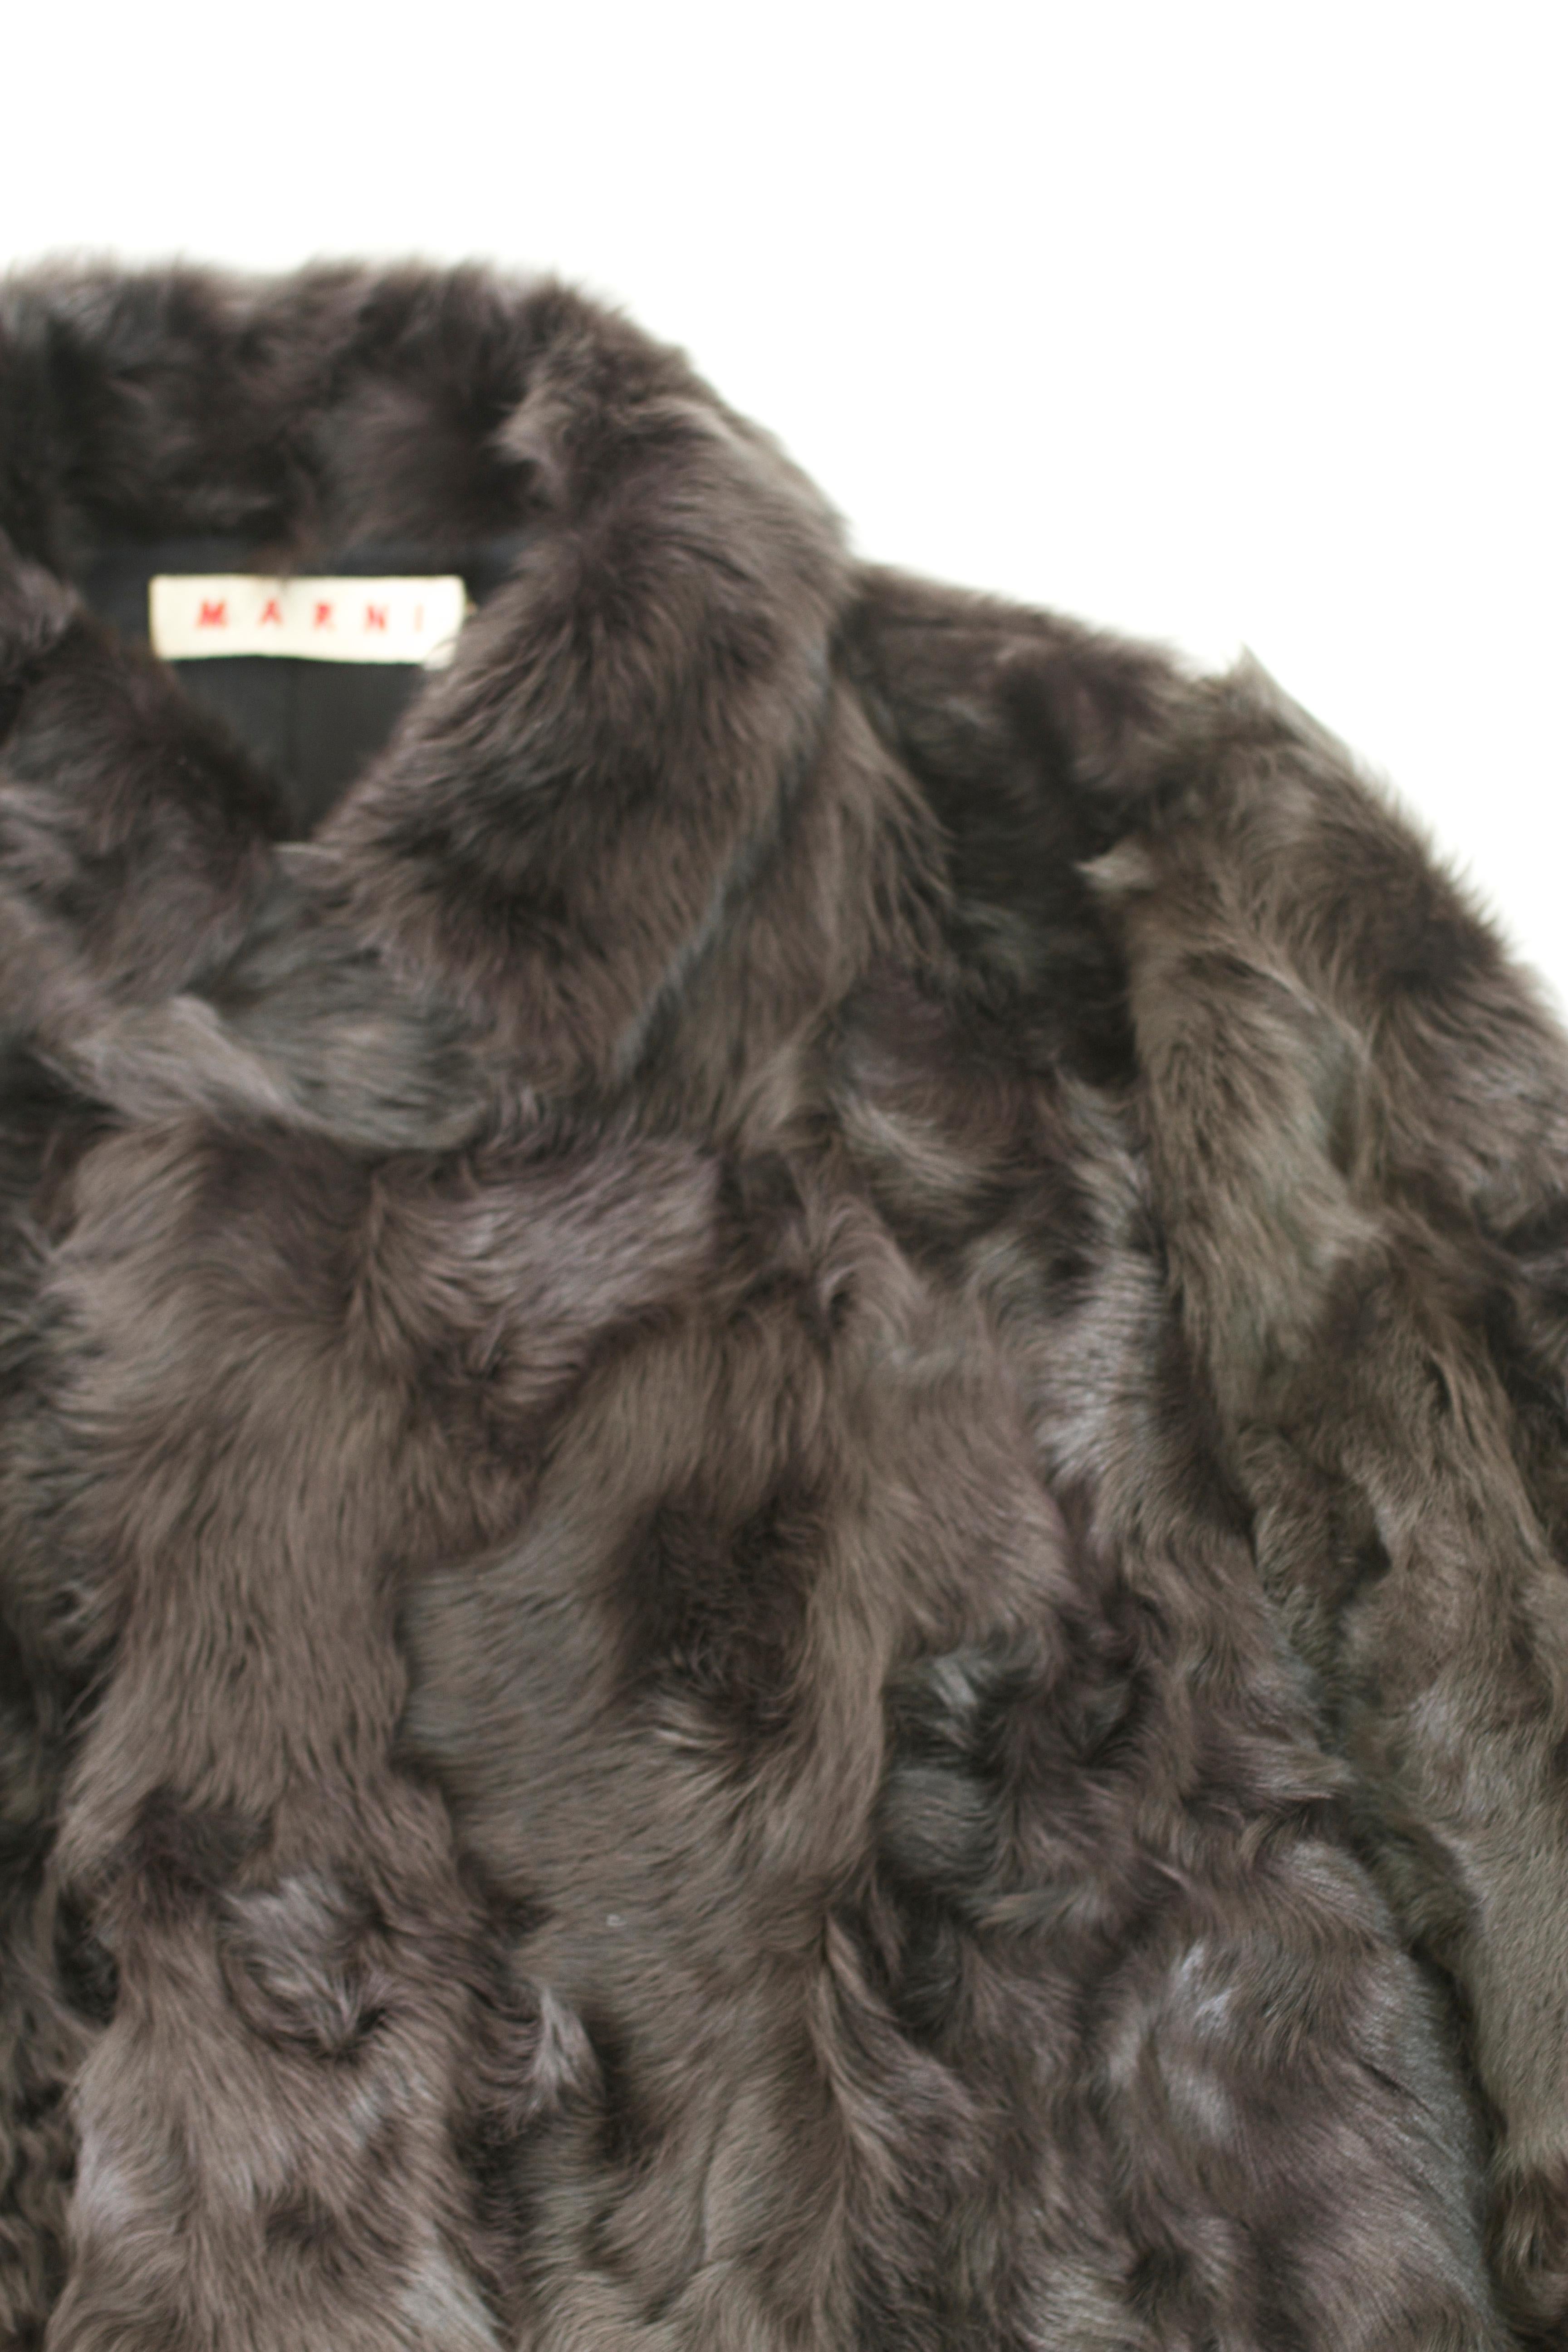 Magnificent Marni coat in a rich goat fur with full leather lining, and vented arm-holes for breathability. 

Pit-to-pit: 23 Inches
Length from bottom of collar: 32 Inches
Sleeve Length: 28 Inches